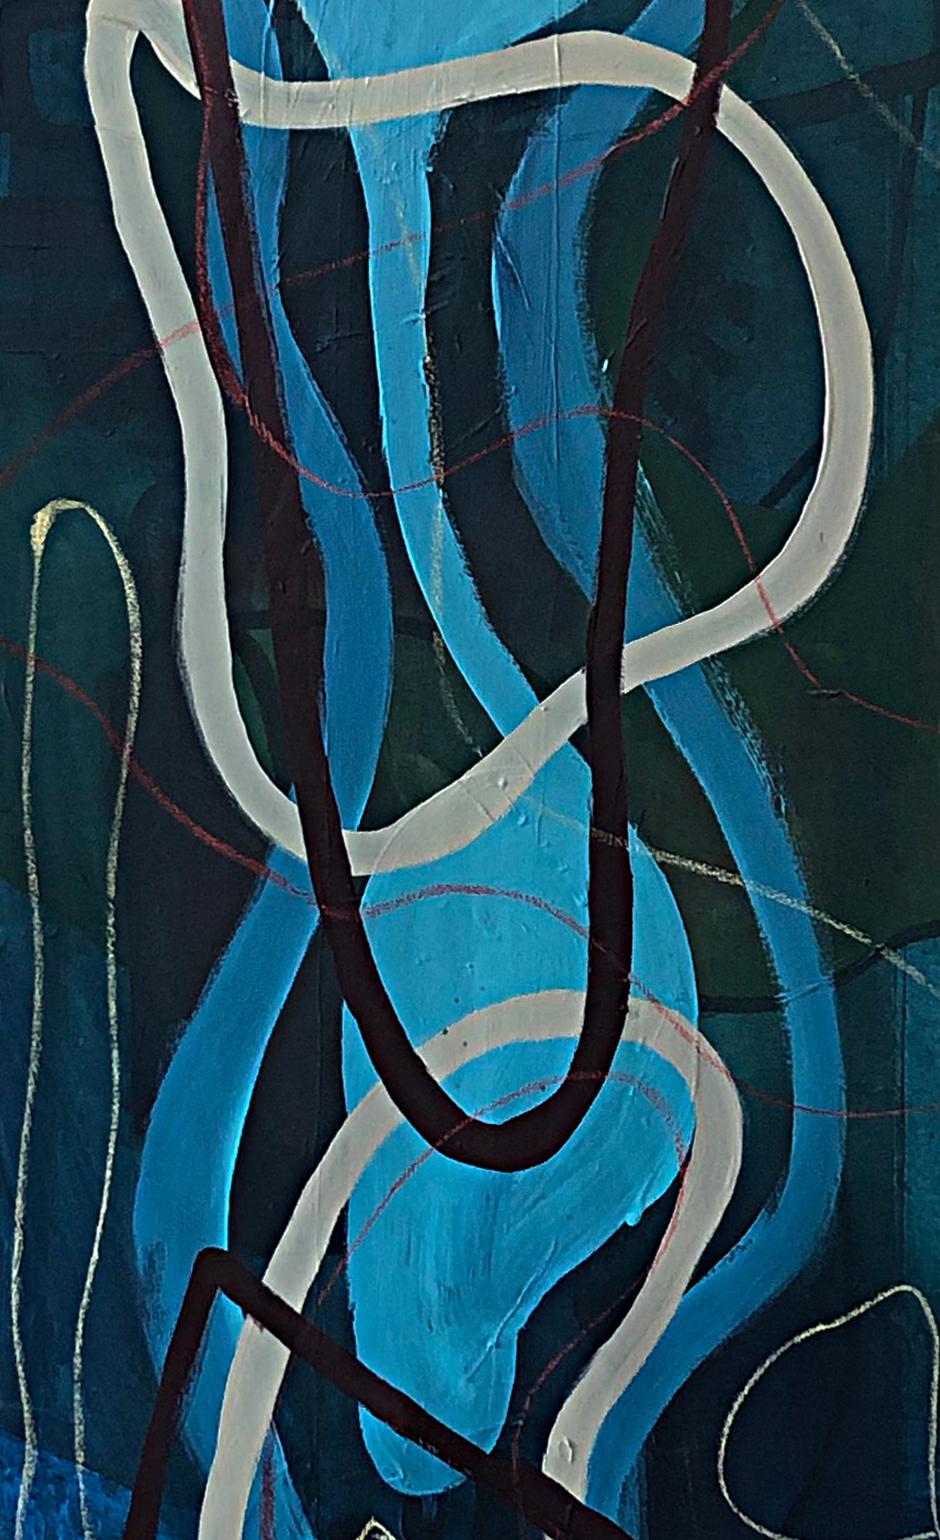 Circuito #16-B, by Alec Franco
From The Series Circuito 
Acrylic, pastel, and asphalt paint on canvas  
Image Size: 185 cm H X 45 cm W
Signed by artist
Mix media on canvas  
2019
_______
The artist's works are based on time and on informal aesthetic